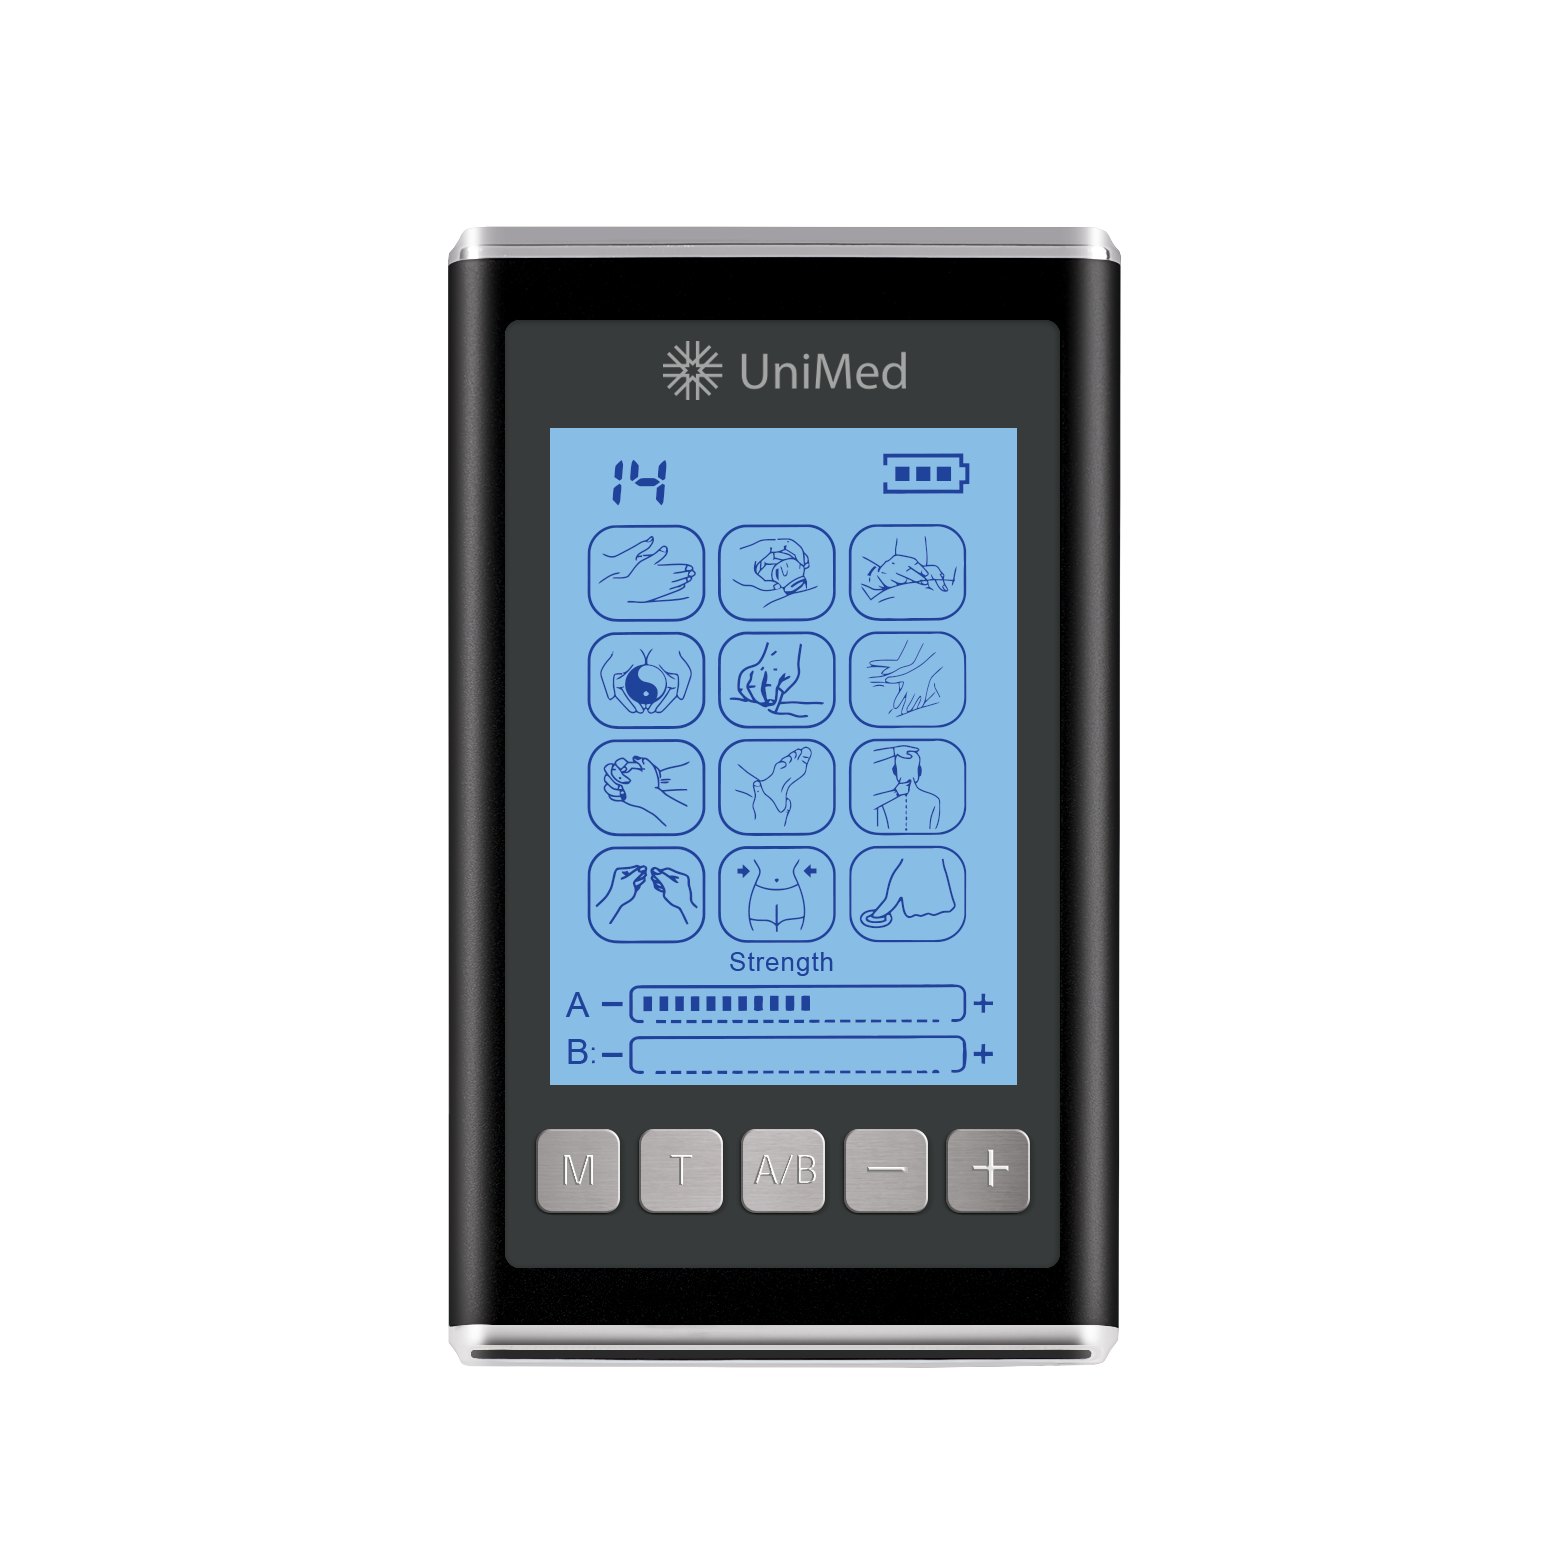 Unimed Pro X - High End, The Most Advanced TENS Unit Muscle